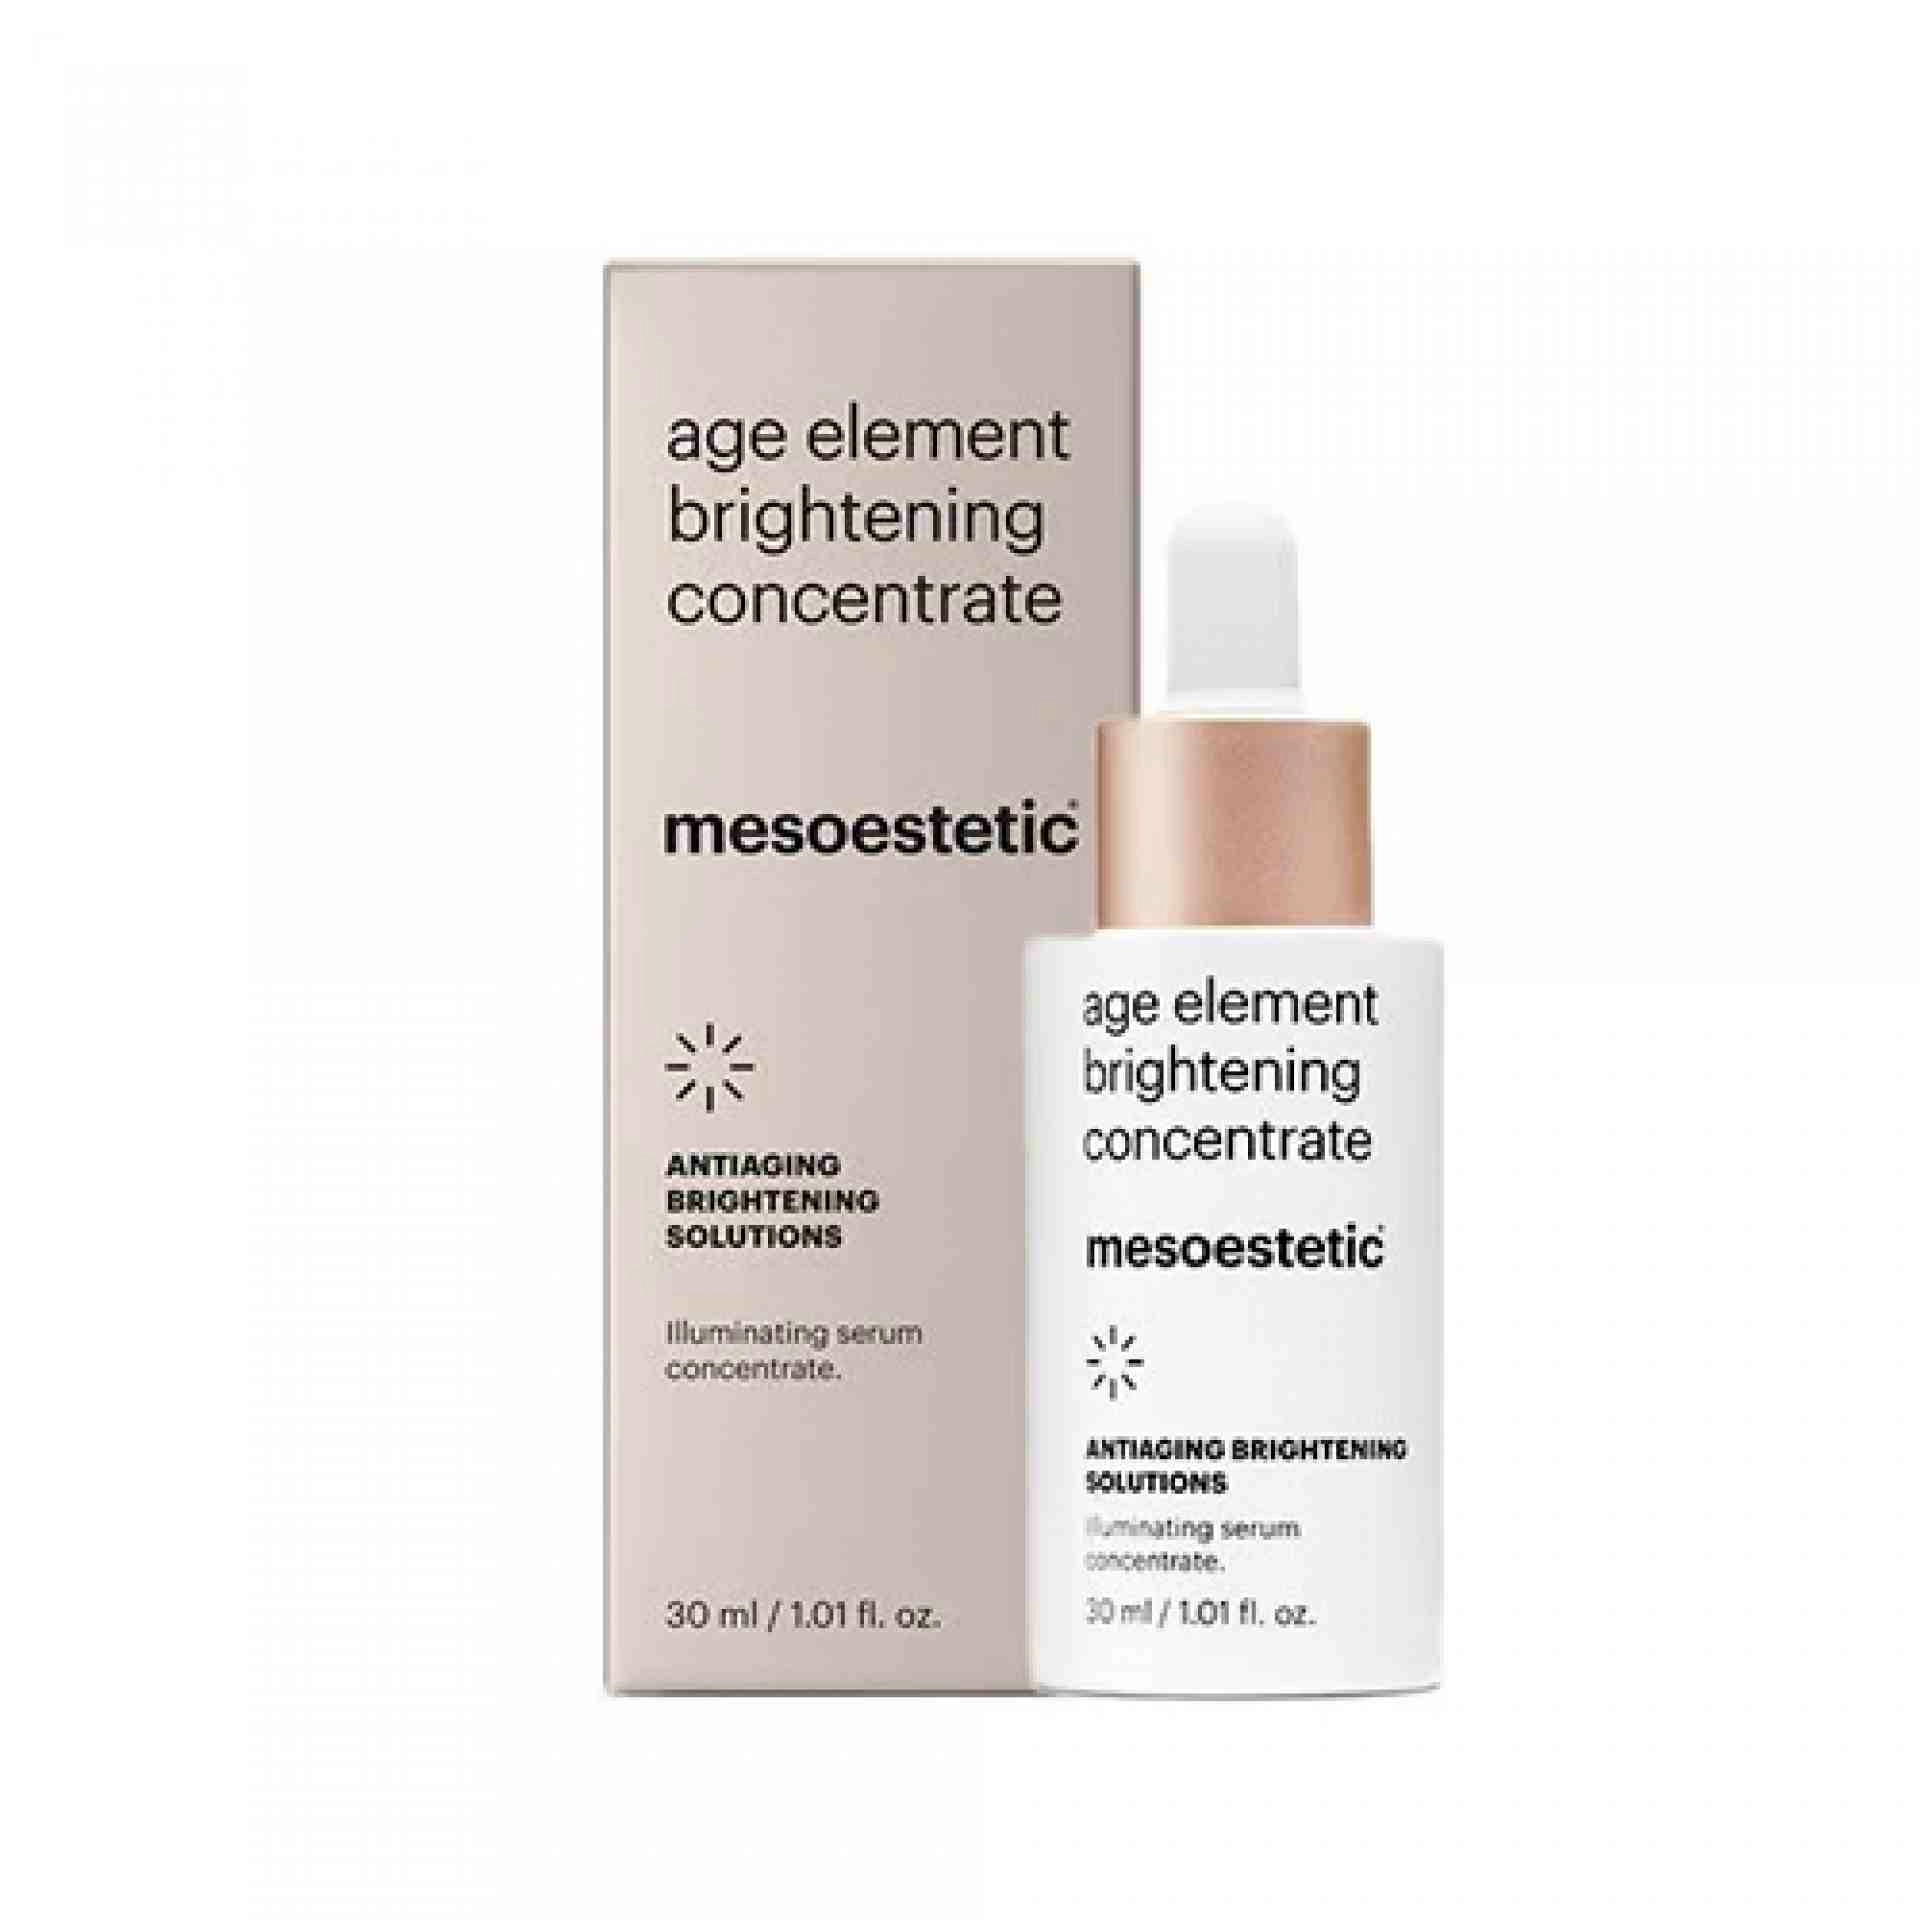 age element brightening concentrate | serum 30ml - antiaging brightening solutions - mesoestetic ®